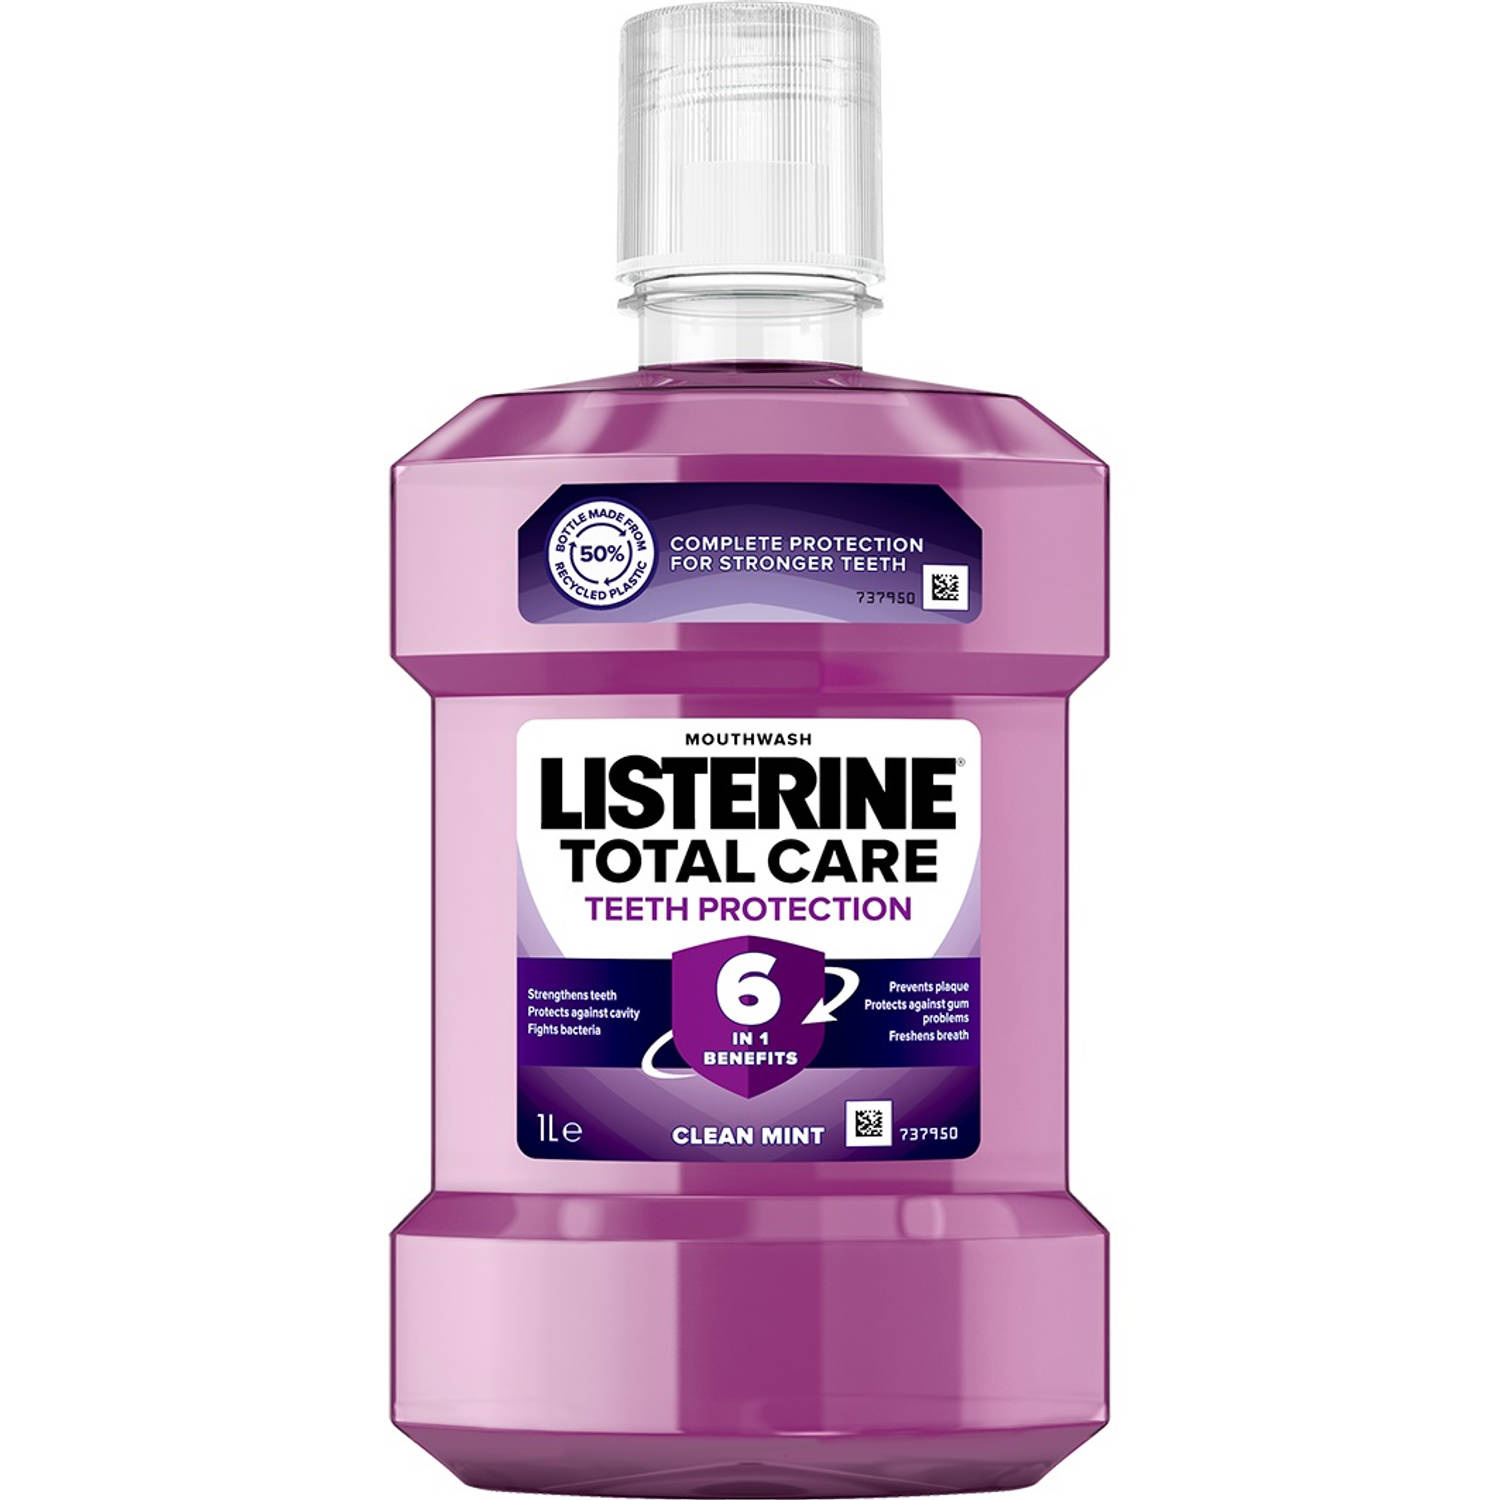 Listerine - Mouthwash for complete protection Total Care - 1000ml